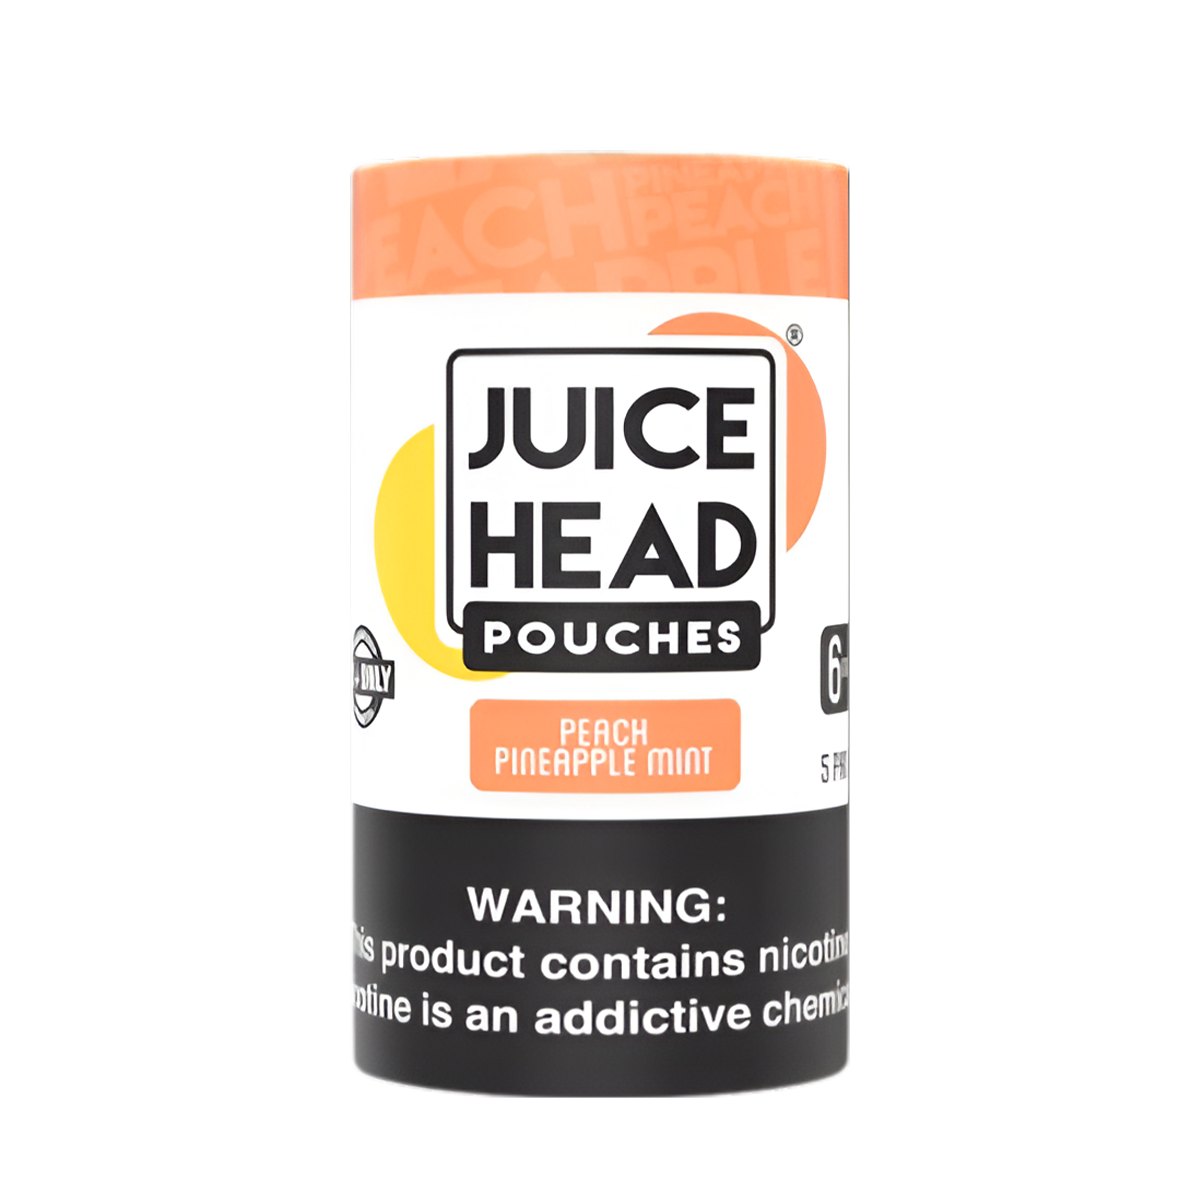 Juice Head Nicotine Pouches (5 Pack) 6 Mg 5x20 Nicotine Punches Peach Pineapple Mint